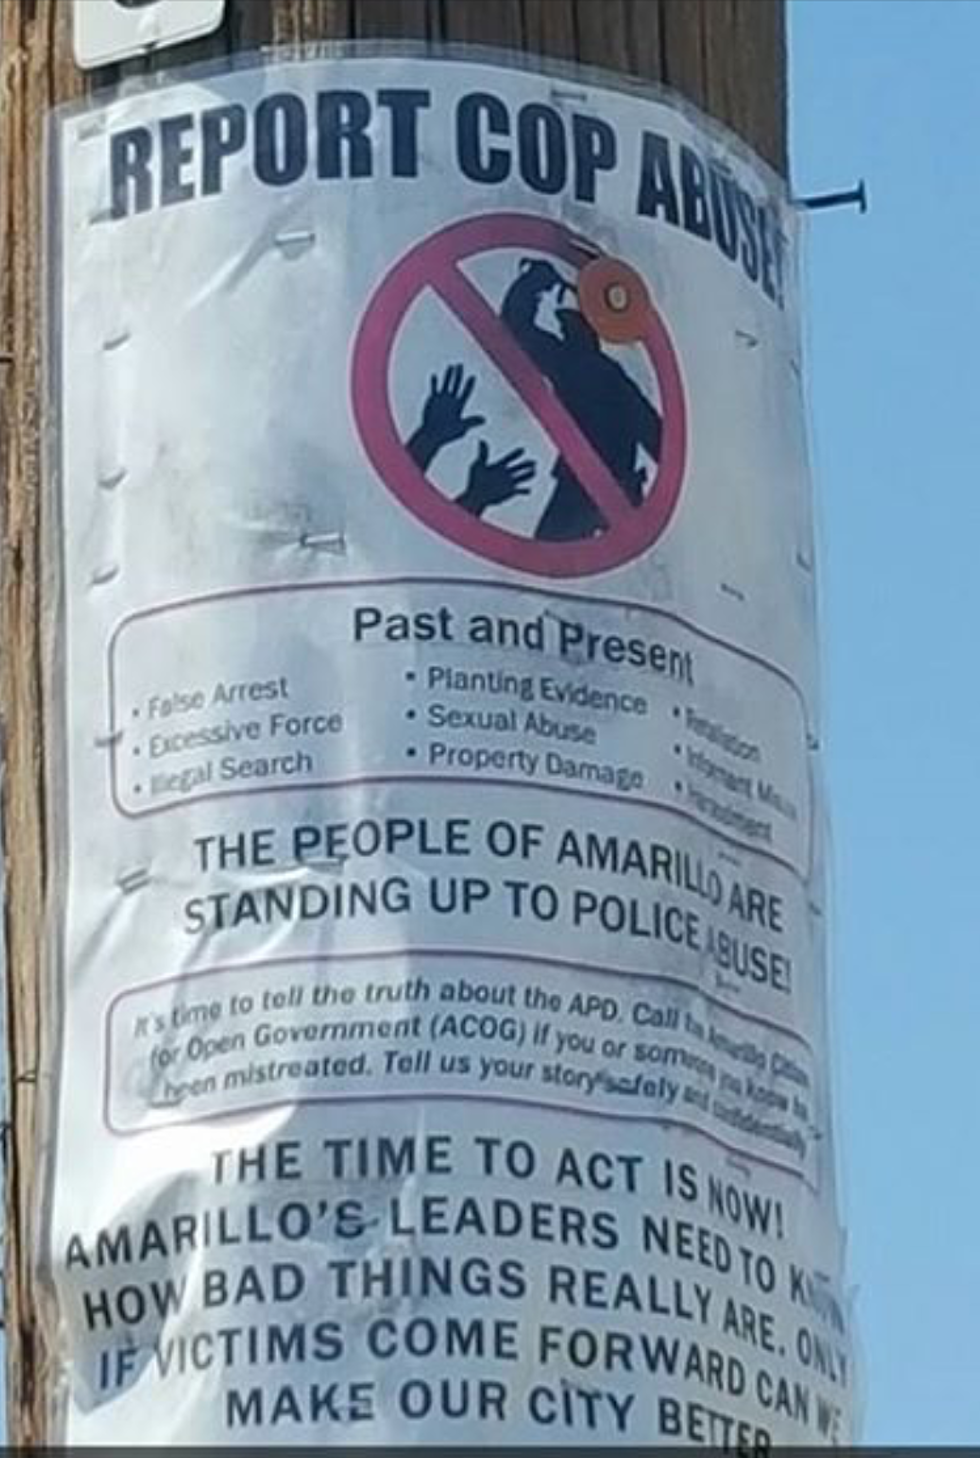 Have You Seen These Fliers About Police Abuse Posted Around Amarillo?